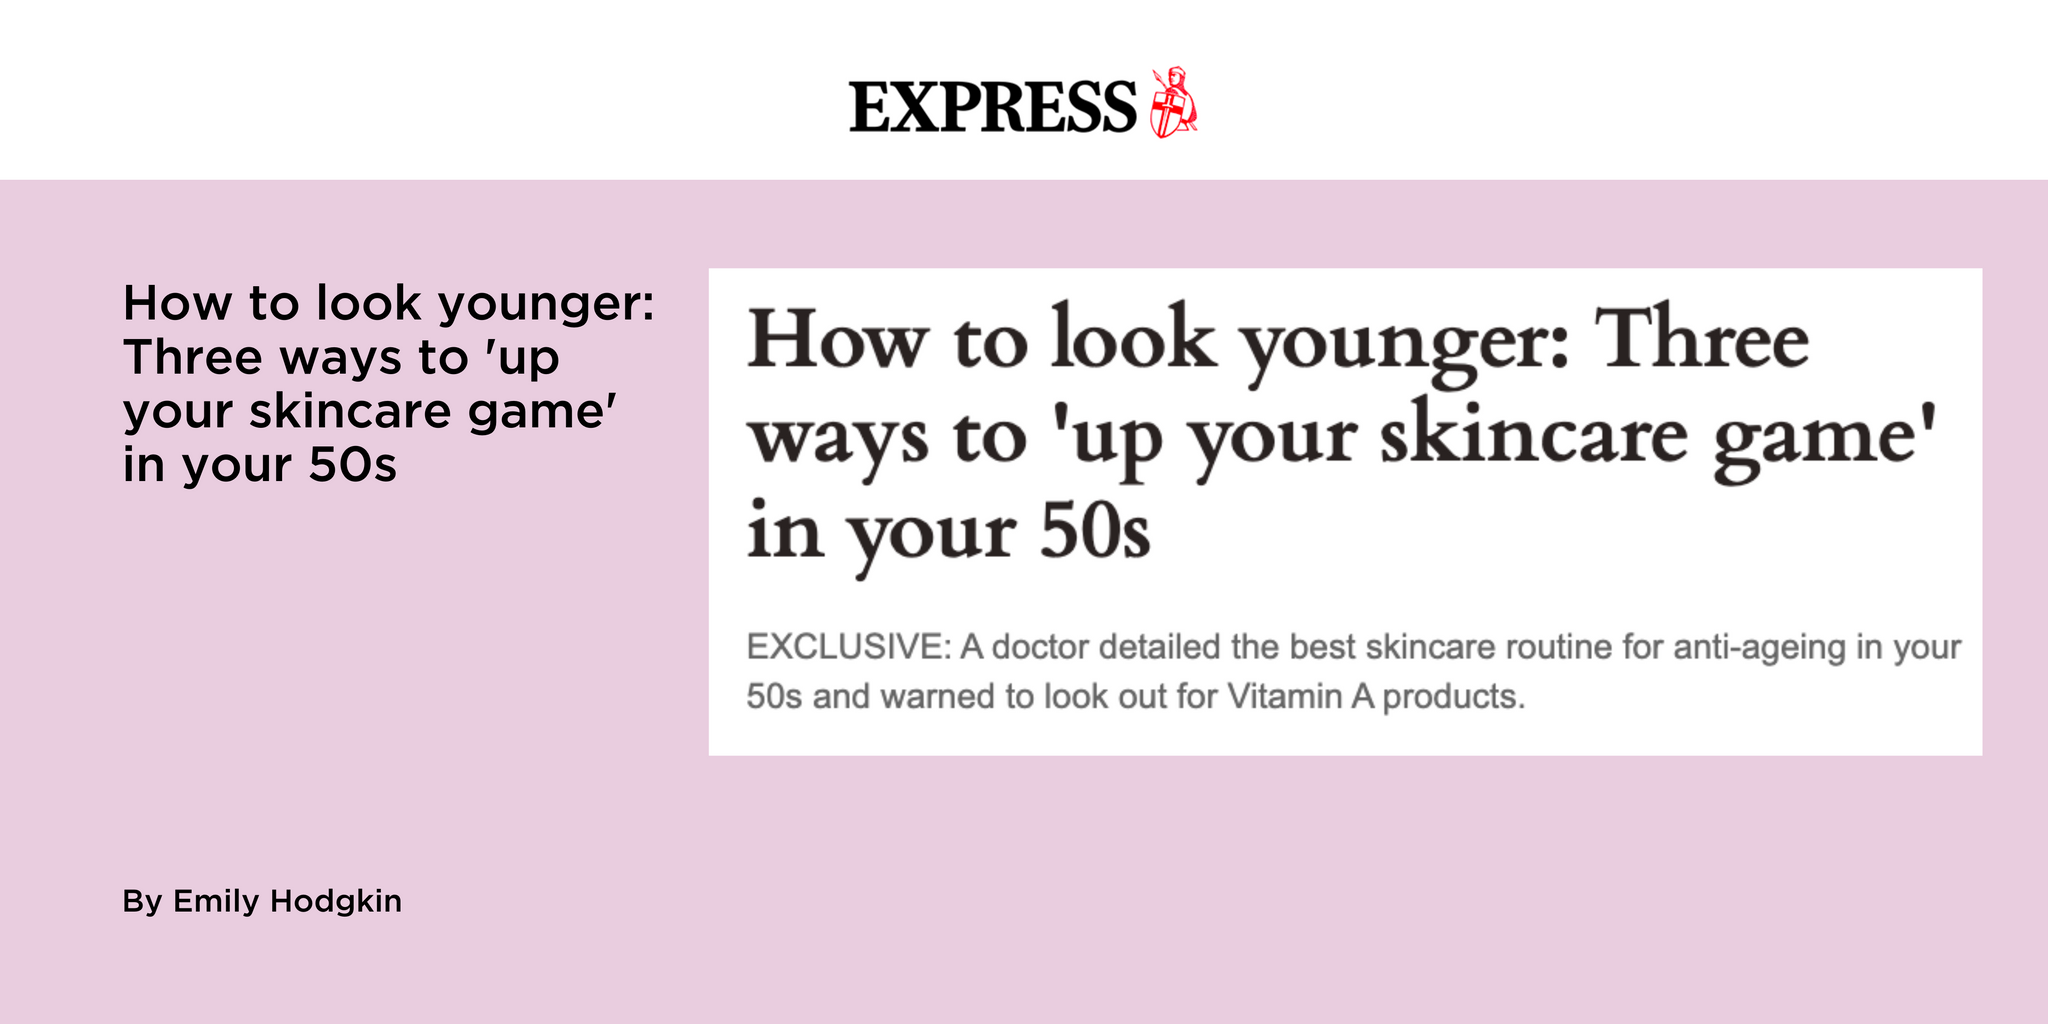 How to look younger: Three ways to 'up your skincare game' in your 50s